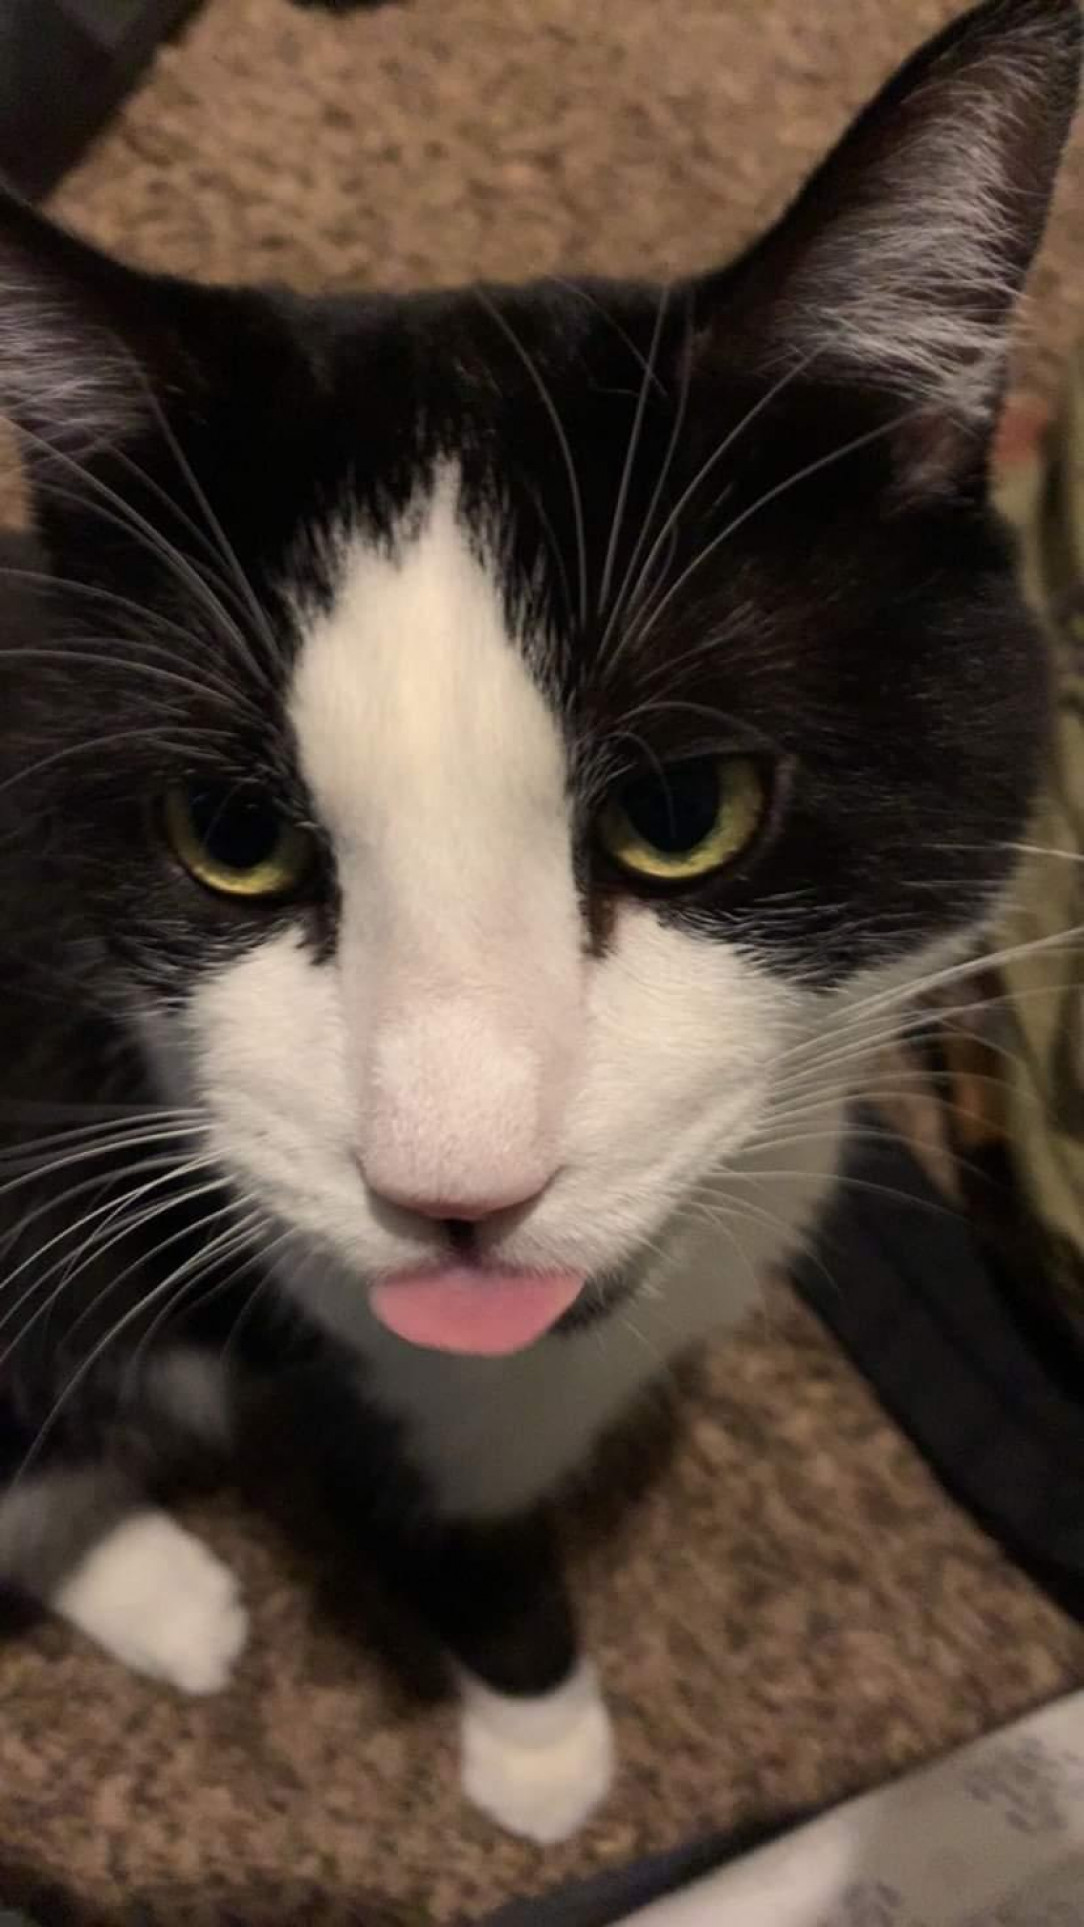 When you lose an argument just stick your tongue out: Master Samson